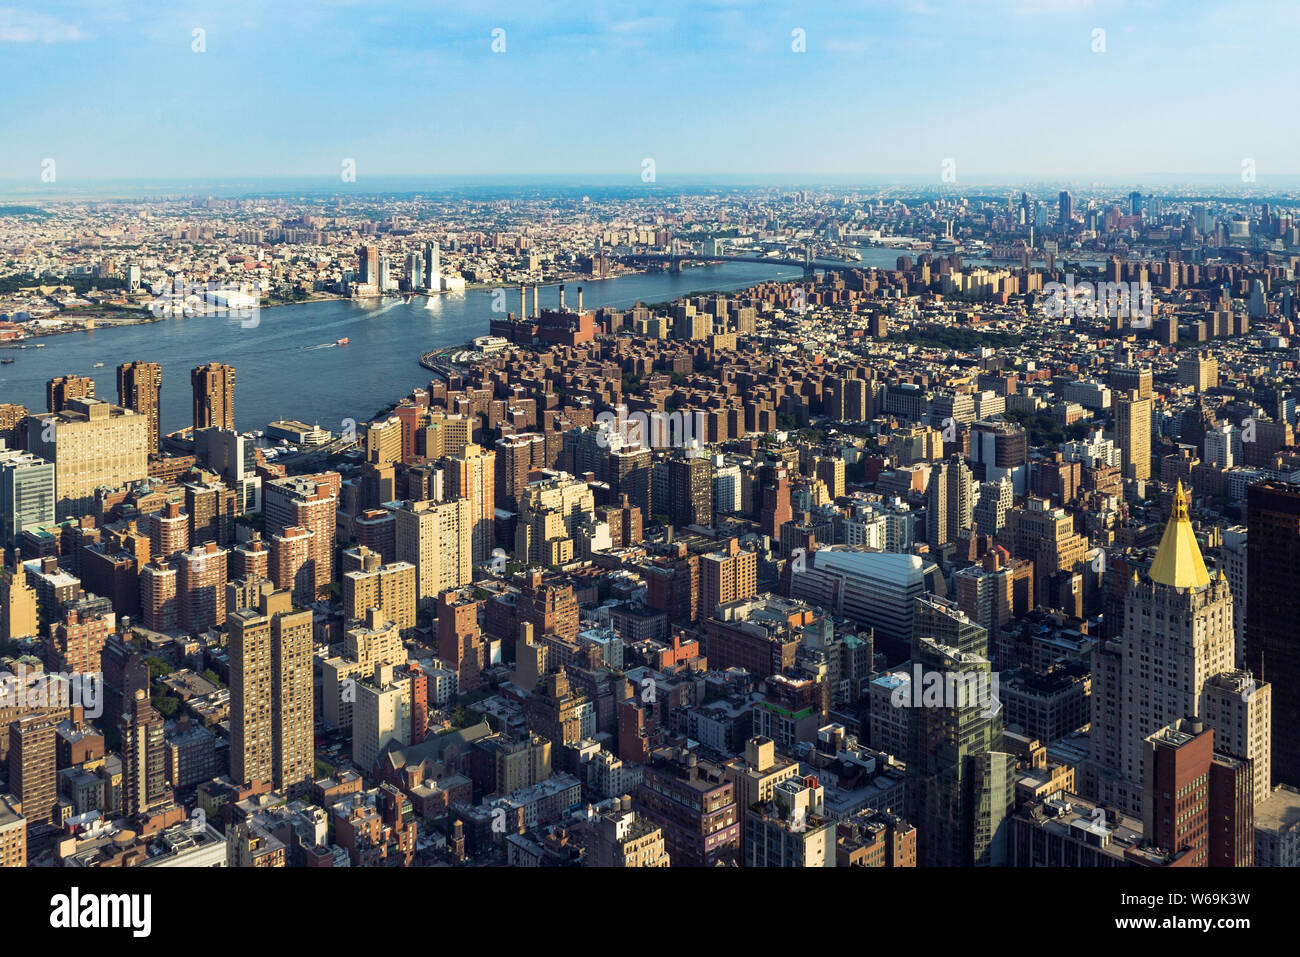 New York City Manhattan street aerial view with skyscrapers Stock Photo